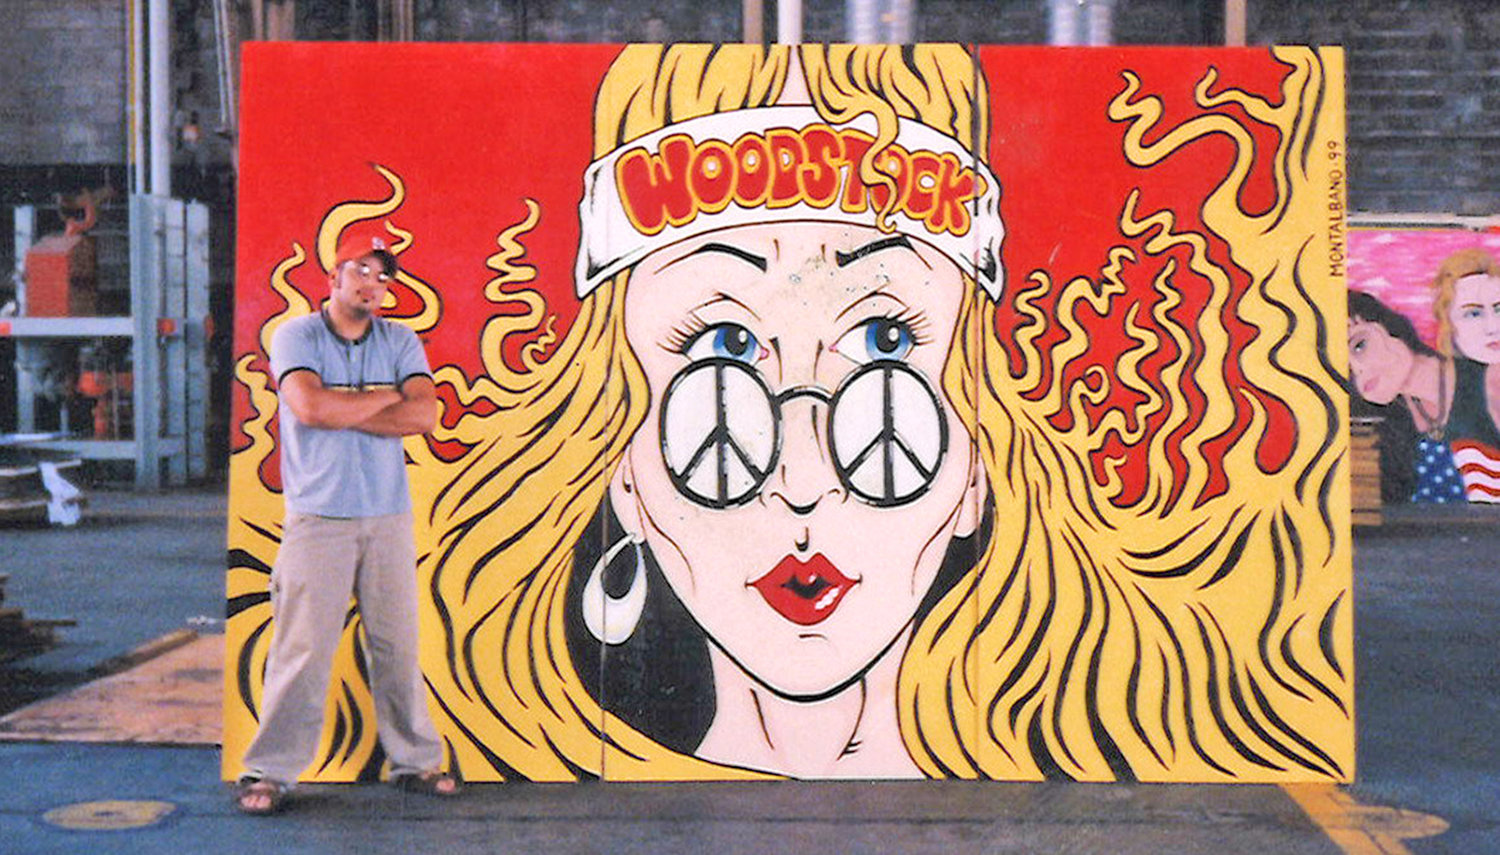 Artist Mark Montalbano with the Woodstock Girl panel he was asked to recreate after the festival because the original piece was destroyed.